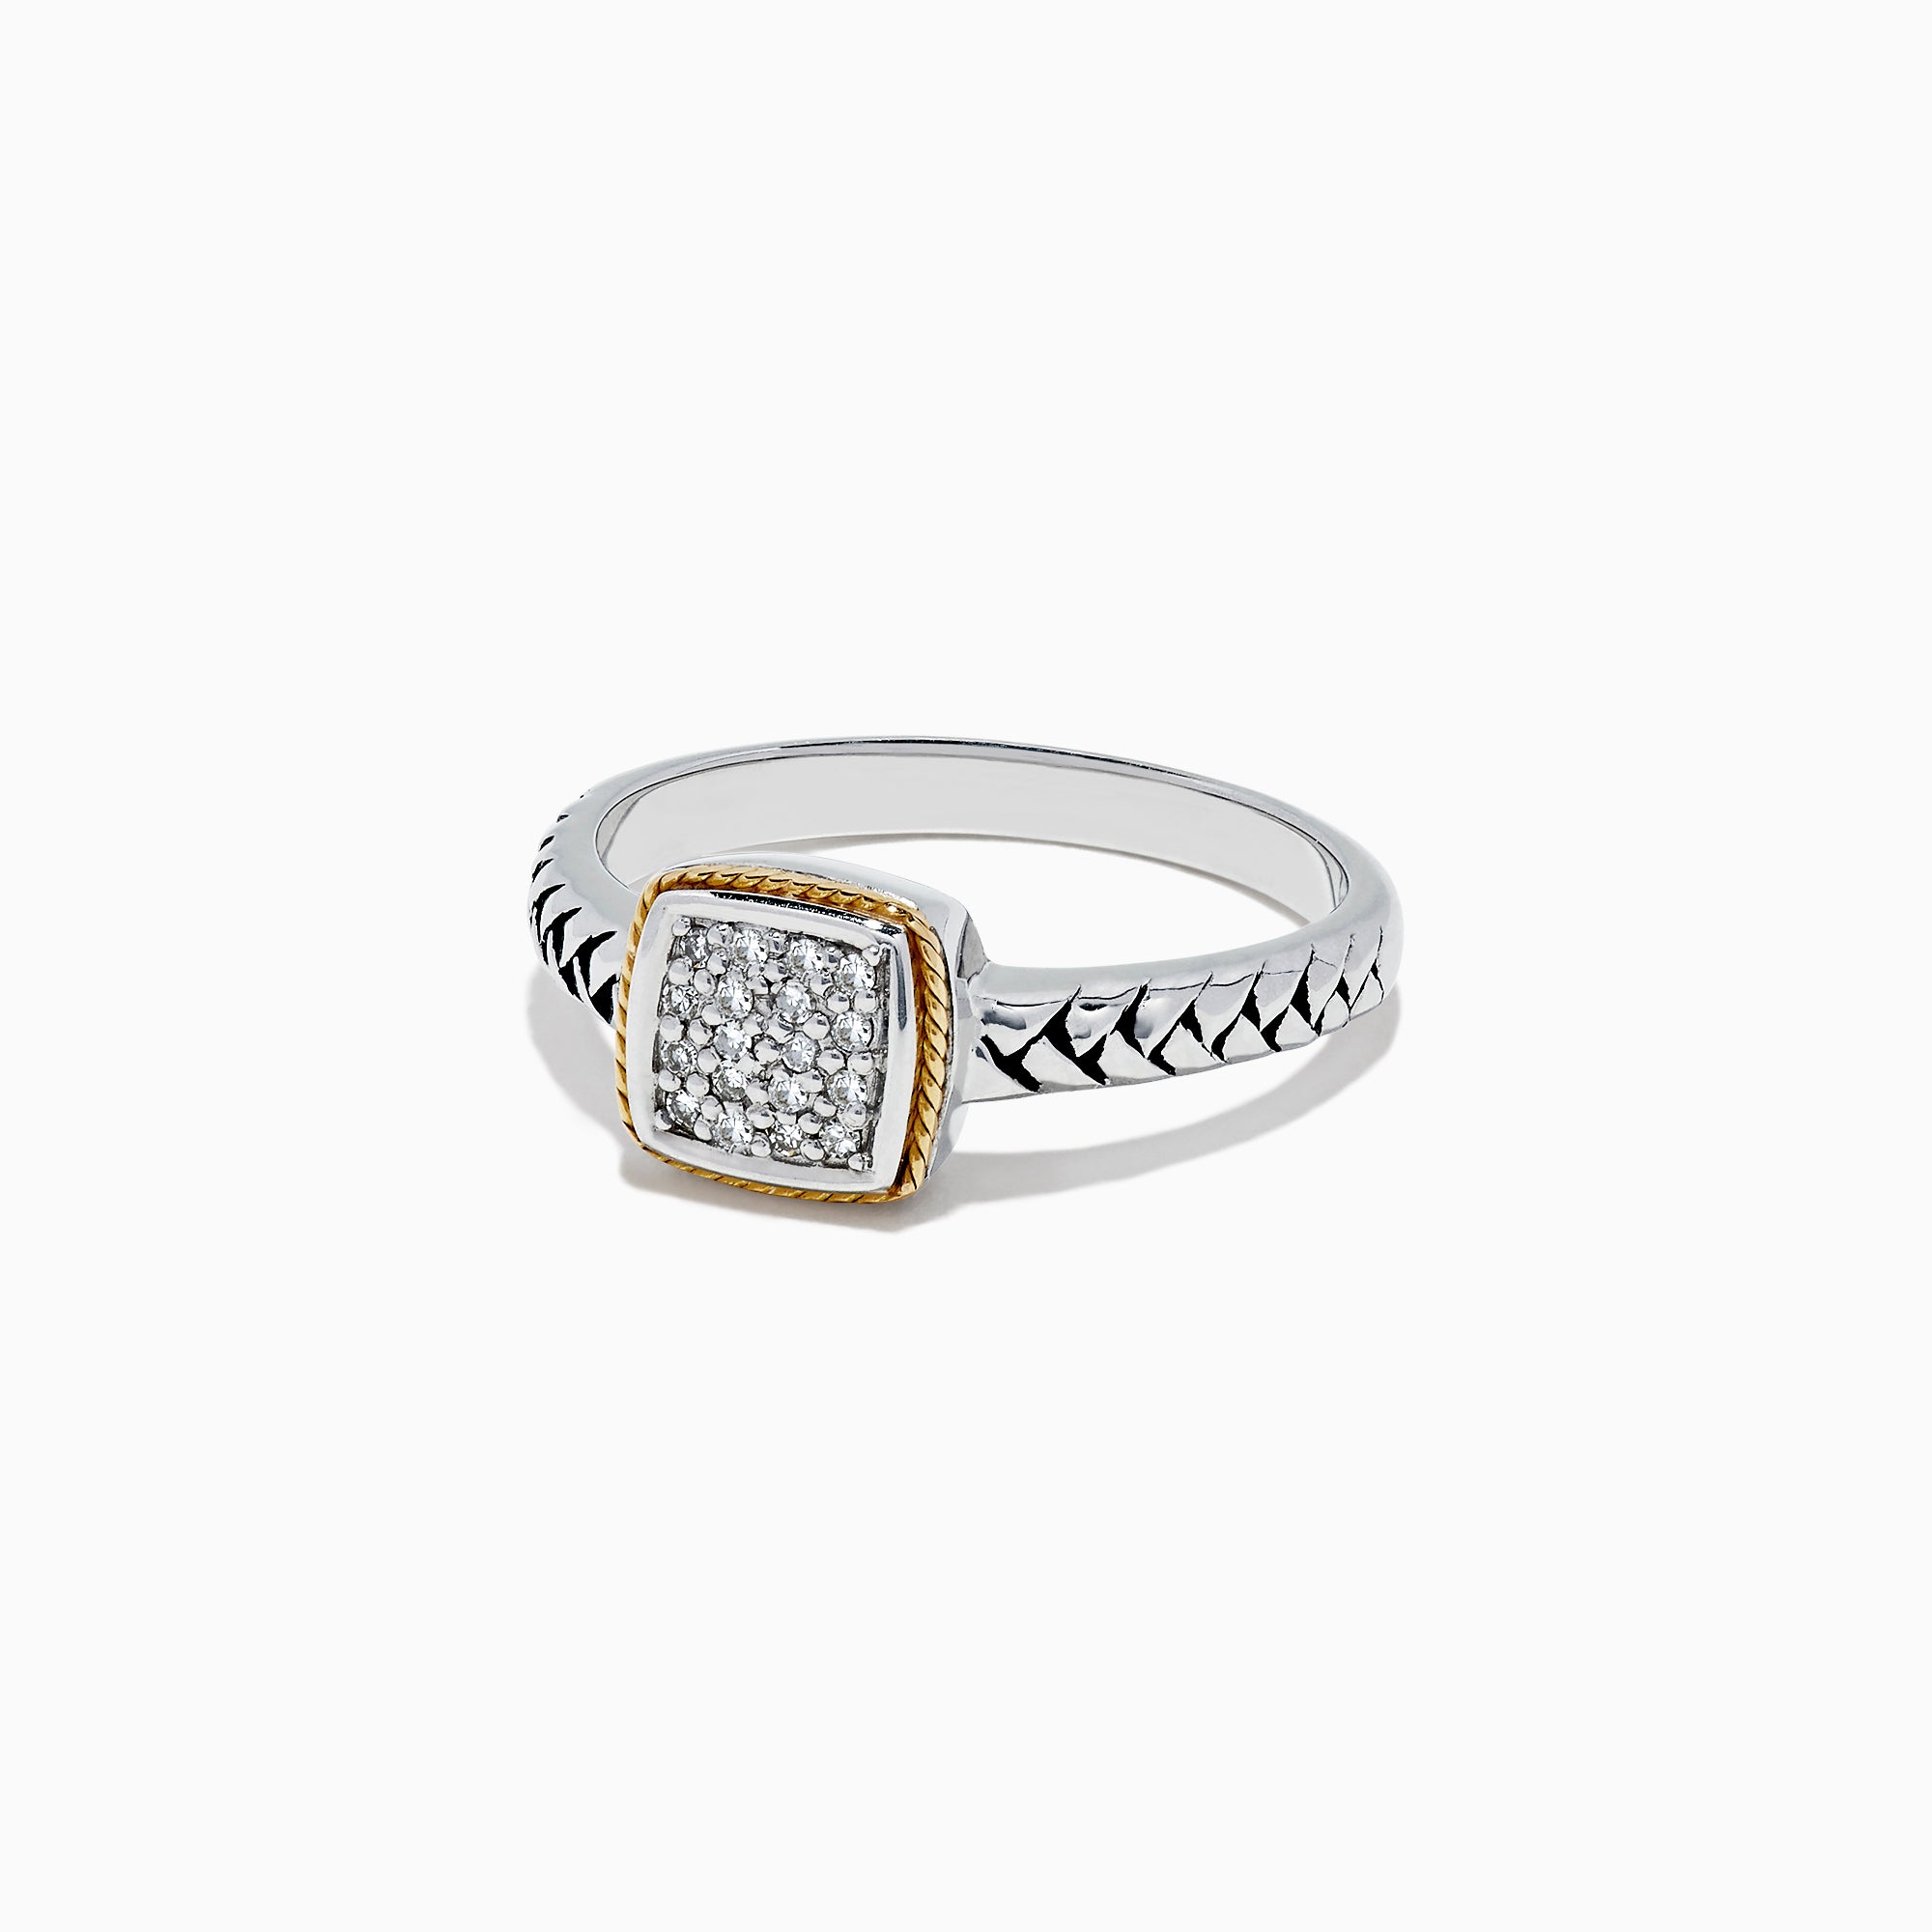 Effy 925 Sterling Silver & 18K Yellow Gold Accented Diamond Ring, 0.07